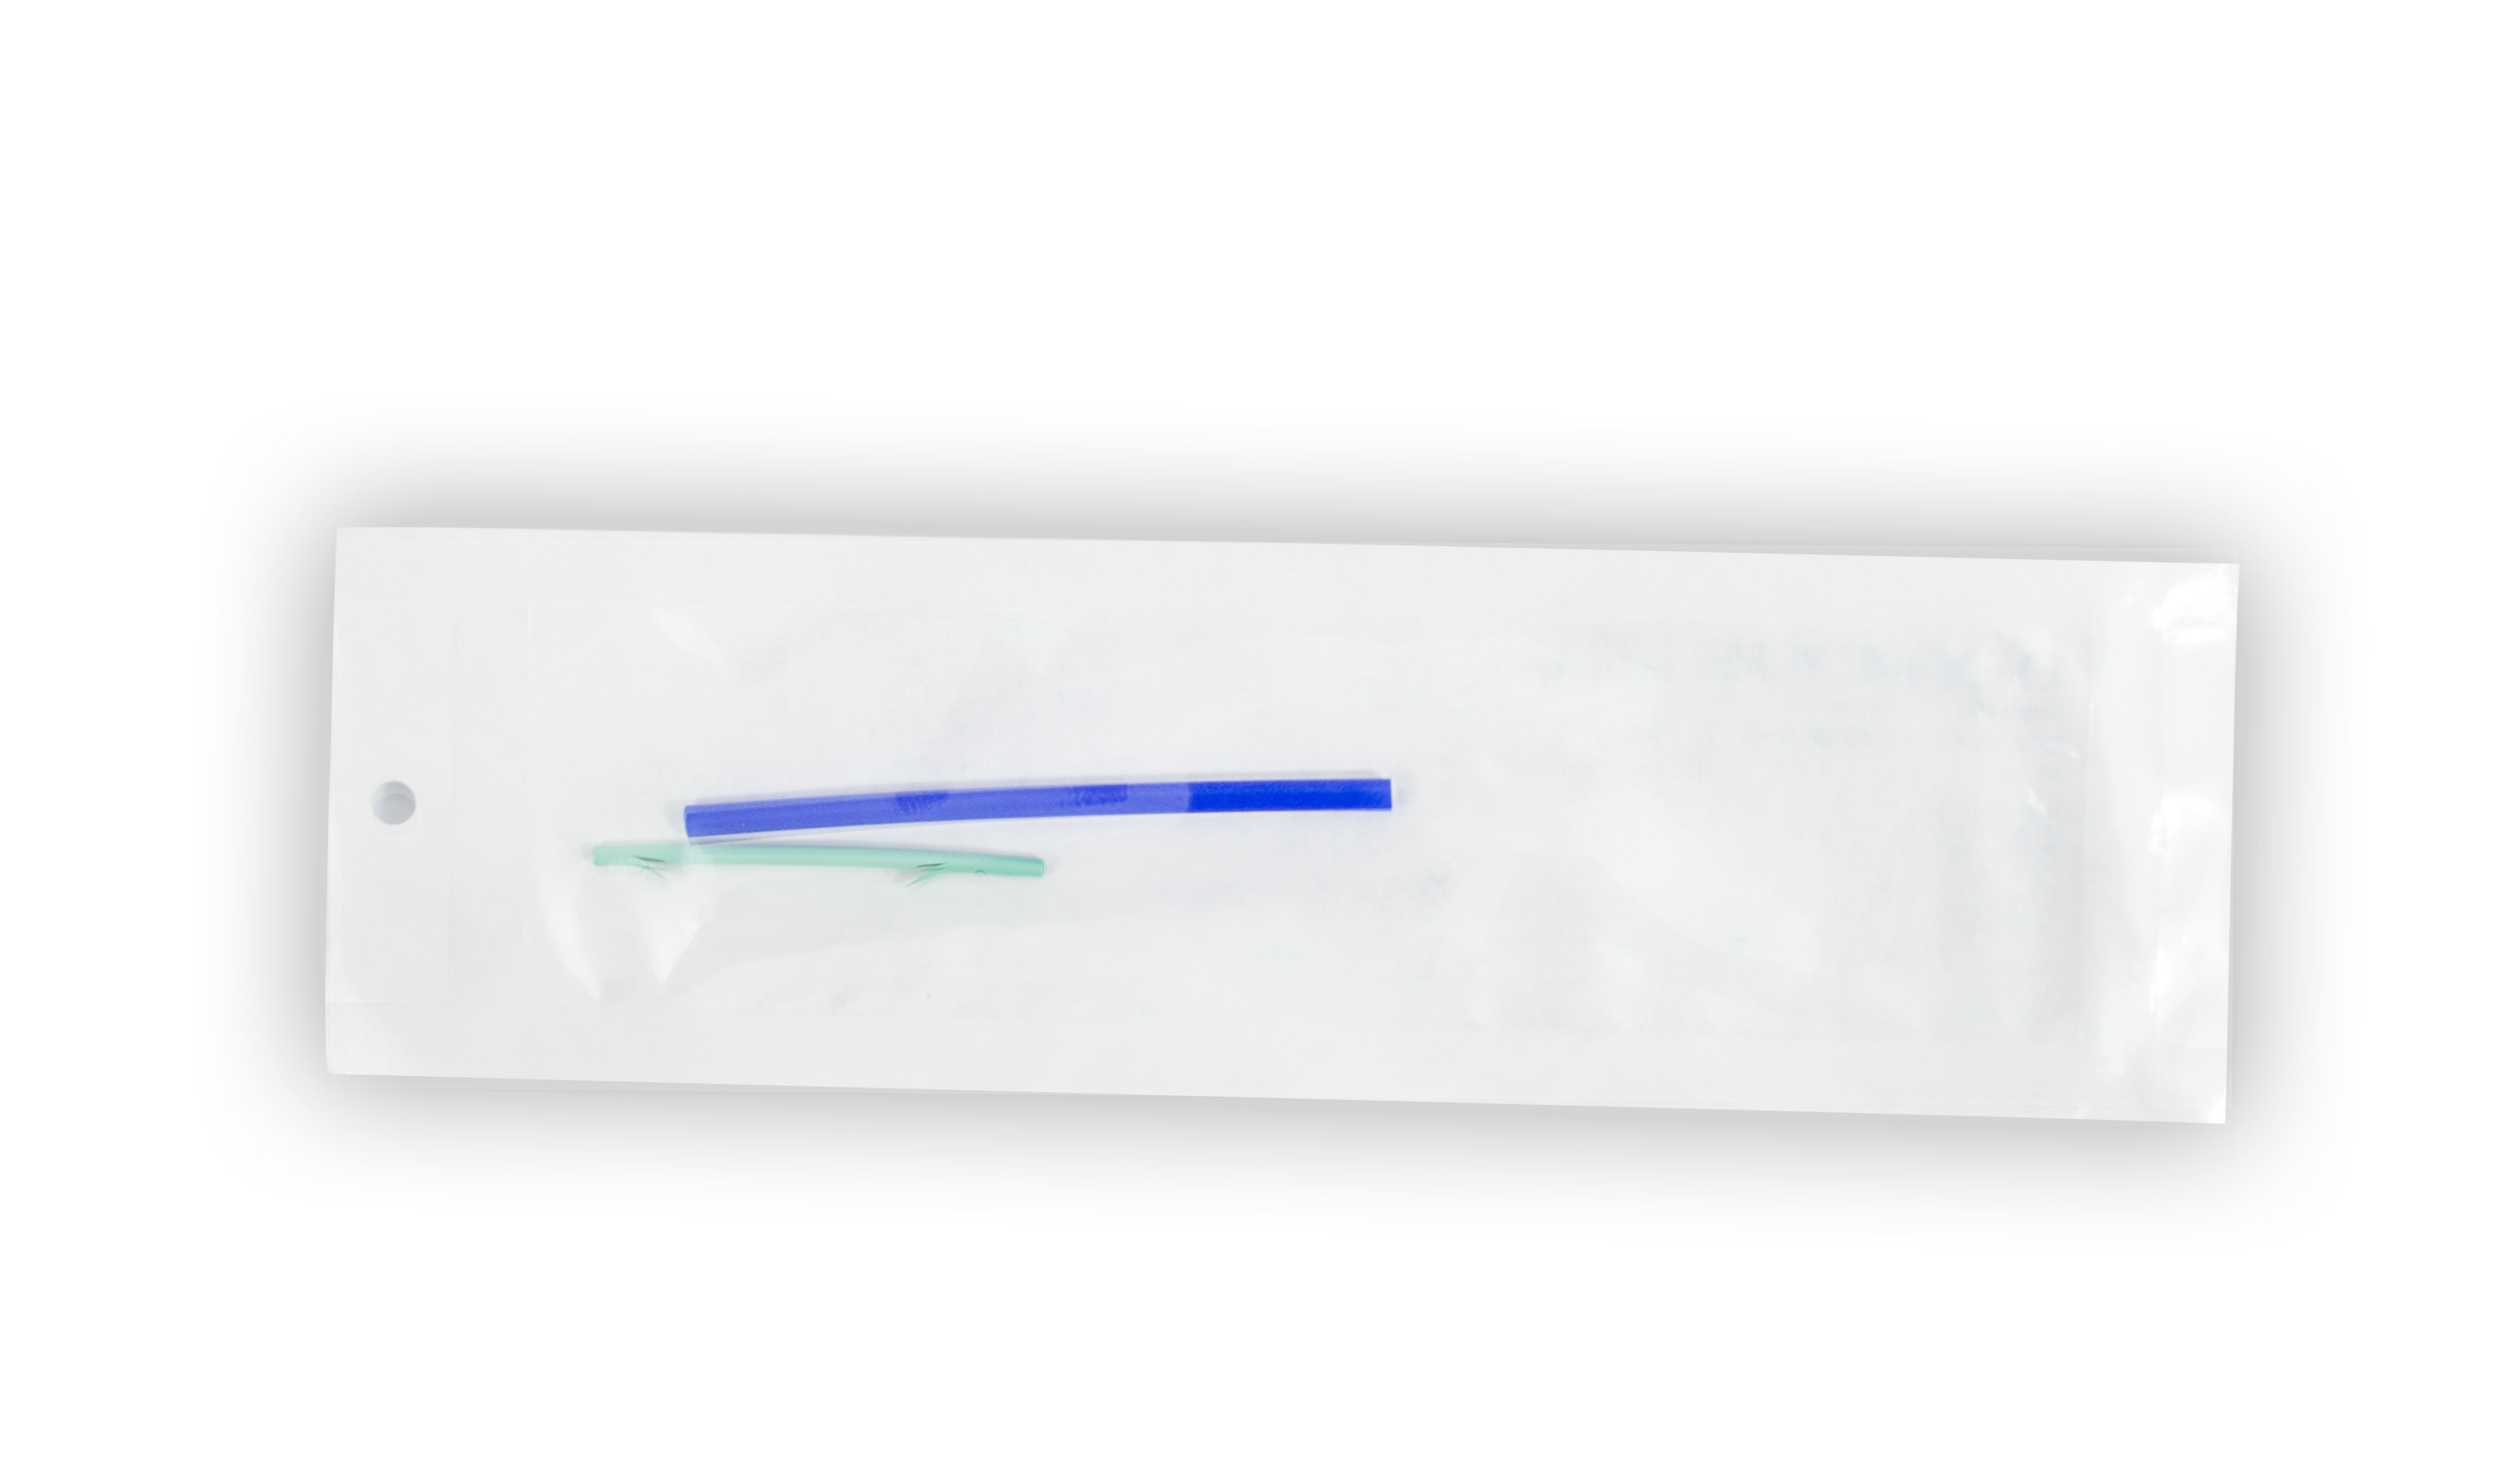 [Out-of-Date] Olympus Disposable Biliary Drainage Tube - PBD-200-0803